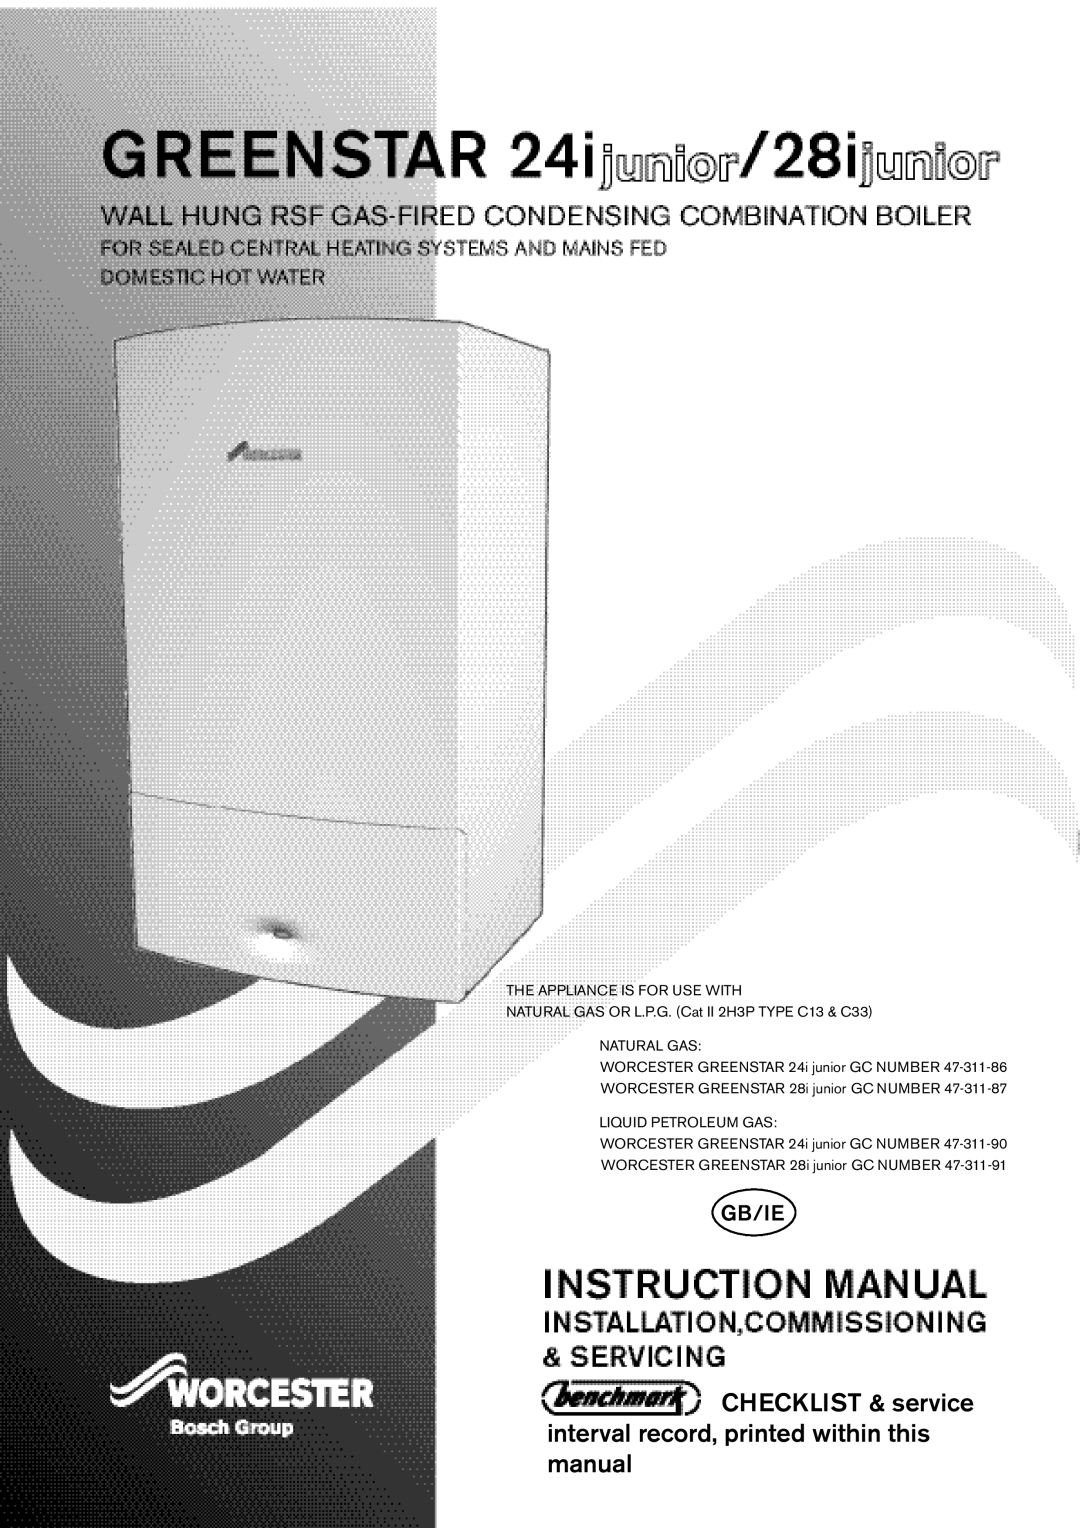 Bosch Appliances 24i junior, 28i junior manual CHECKLIST & service interval record, printed within this manual, Gb/Ie 